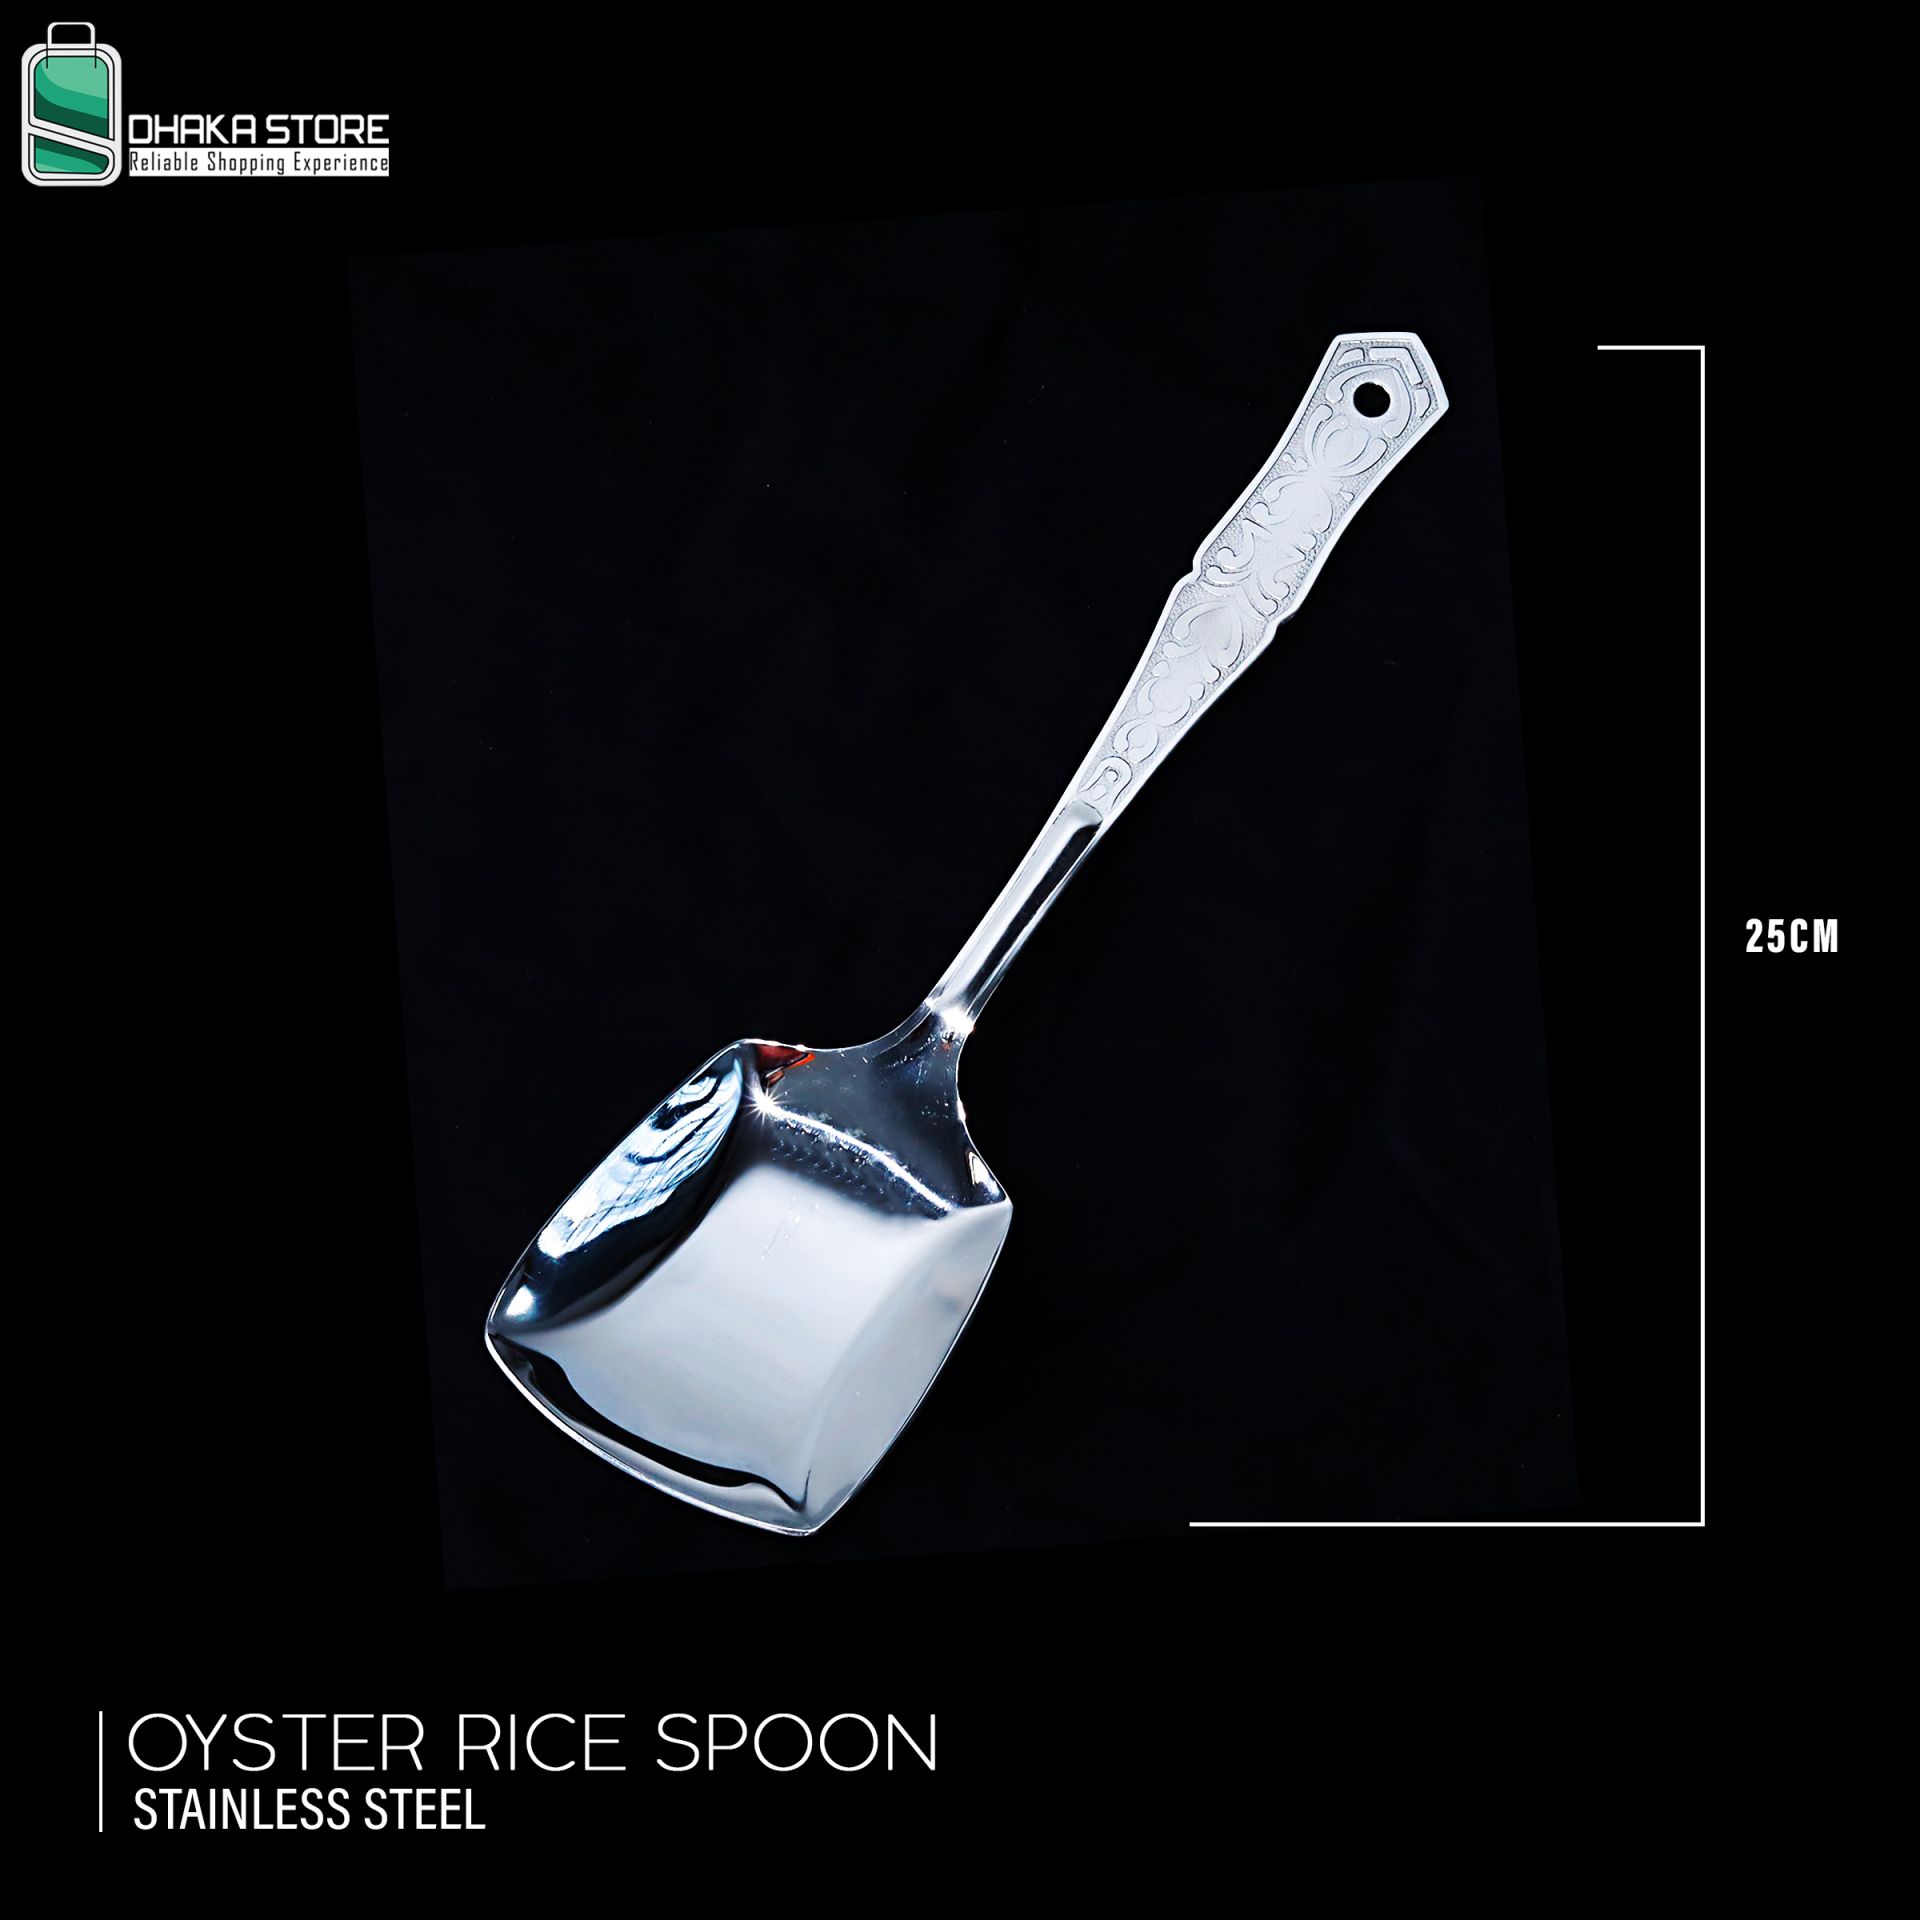 ss, spoon, ss spoon, stainless spoon, dhaka store, Rice spoon, oyster, kitchen accessories